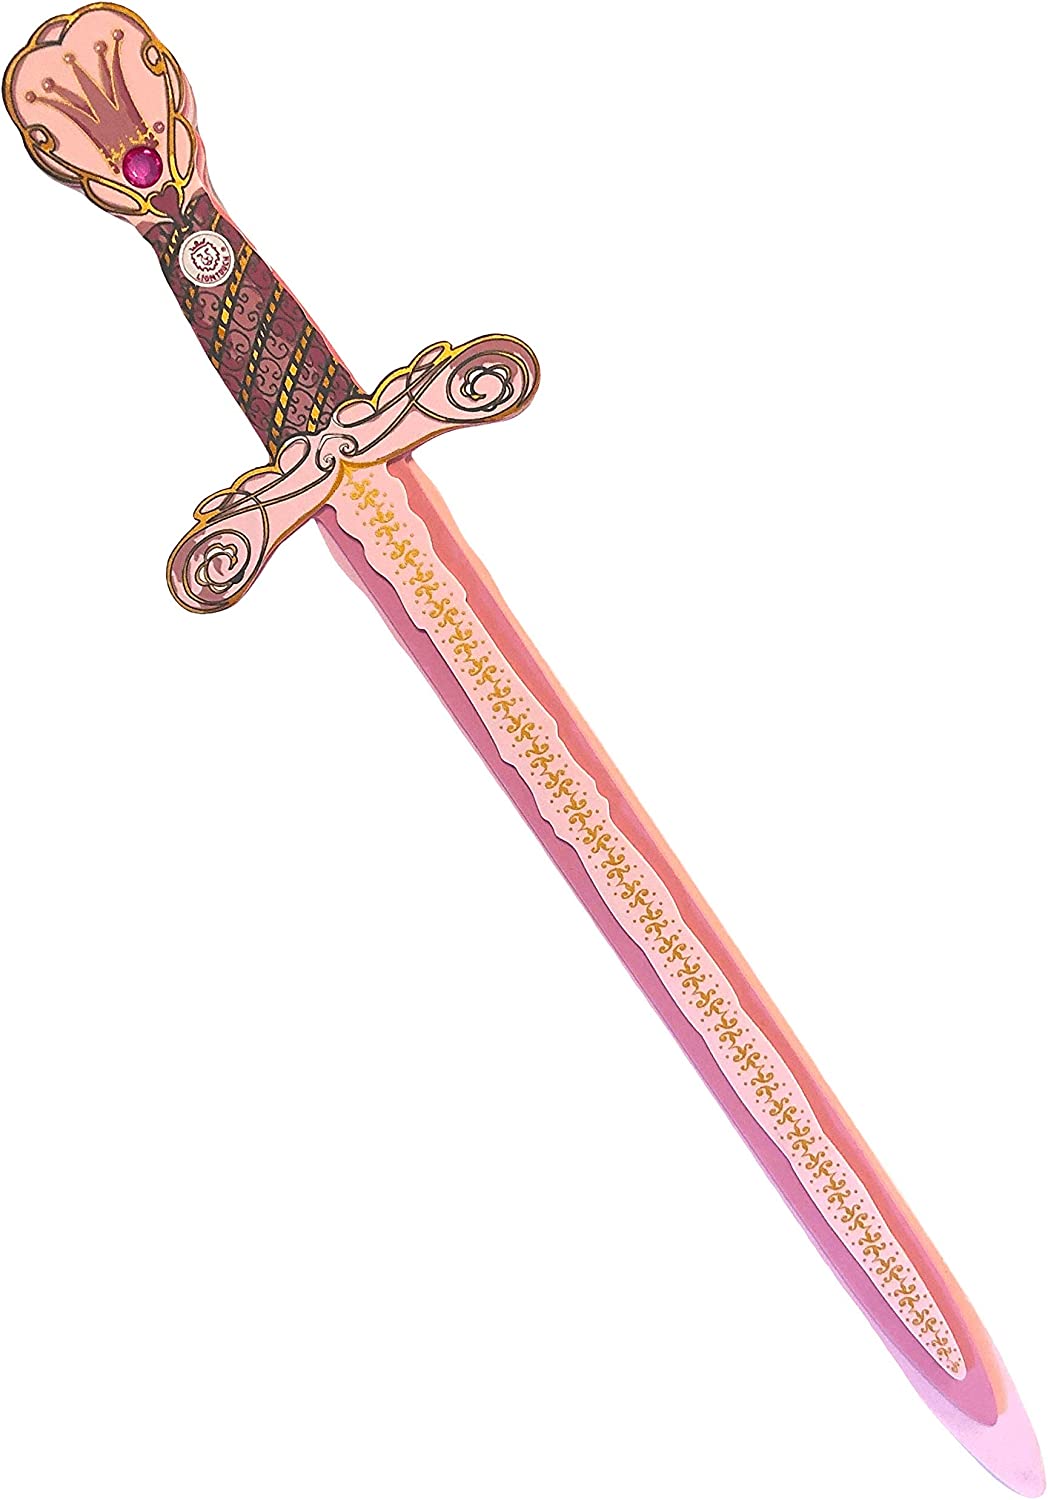 Queen Rosa Sword by Liontouch